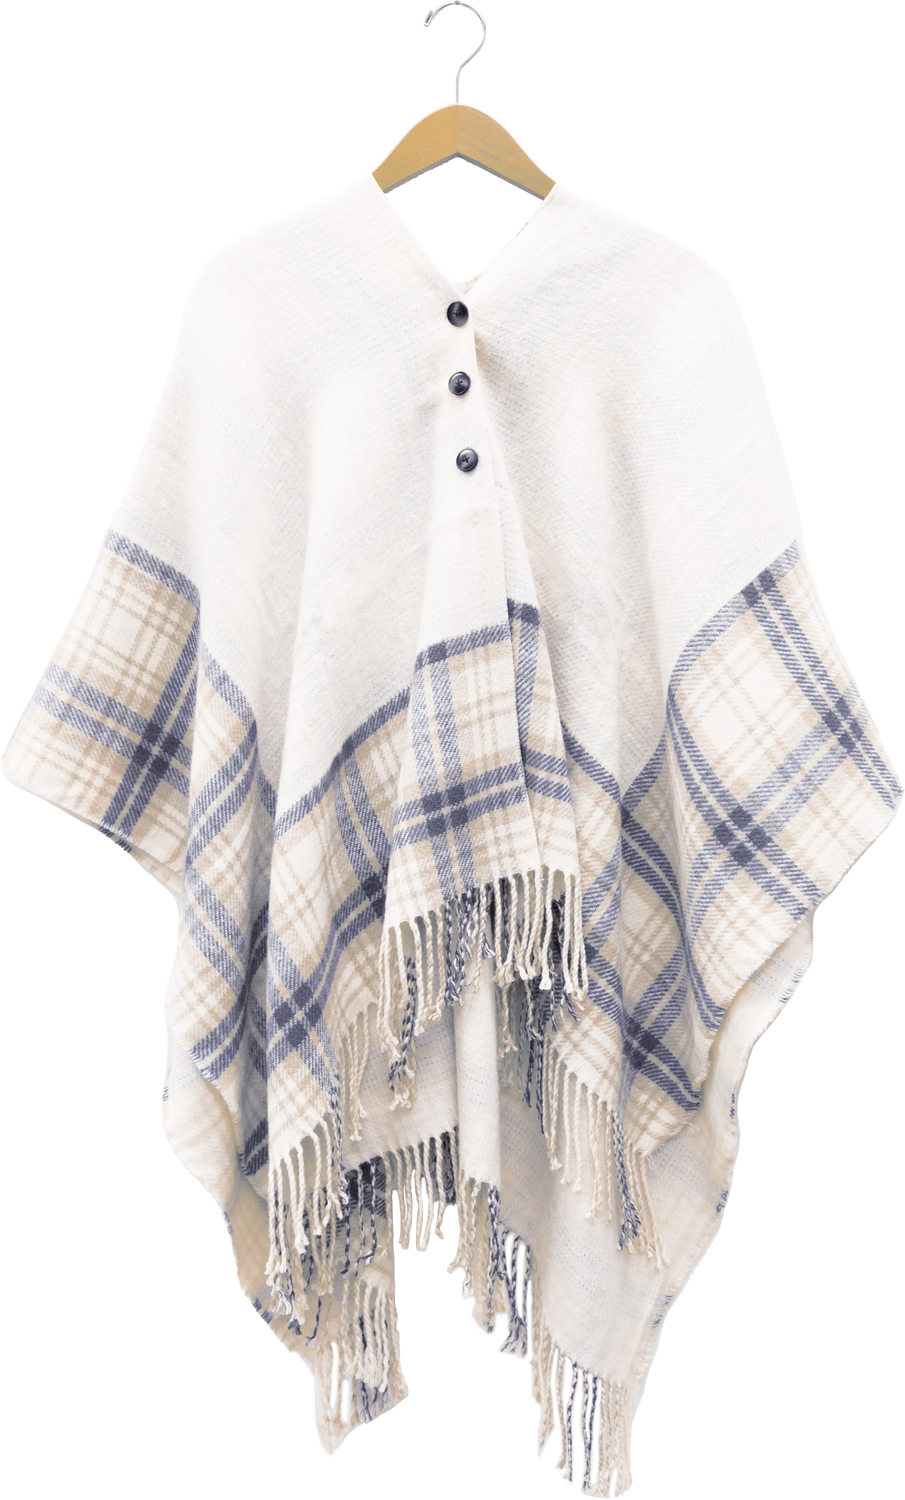 Cream, Camel & Navy Plaid by H2Z Scarves - Cream, Camel & Navy Plaid - 48" x 63" Ruana
One Size Fits Most